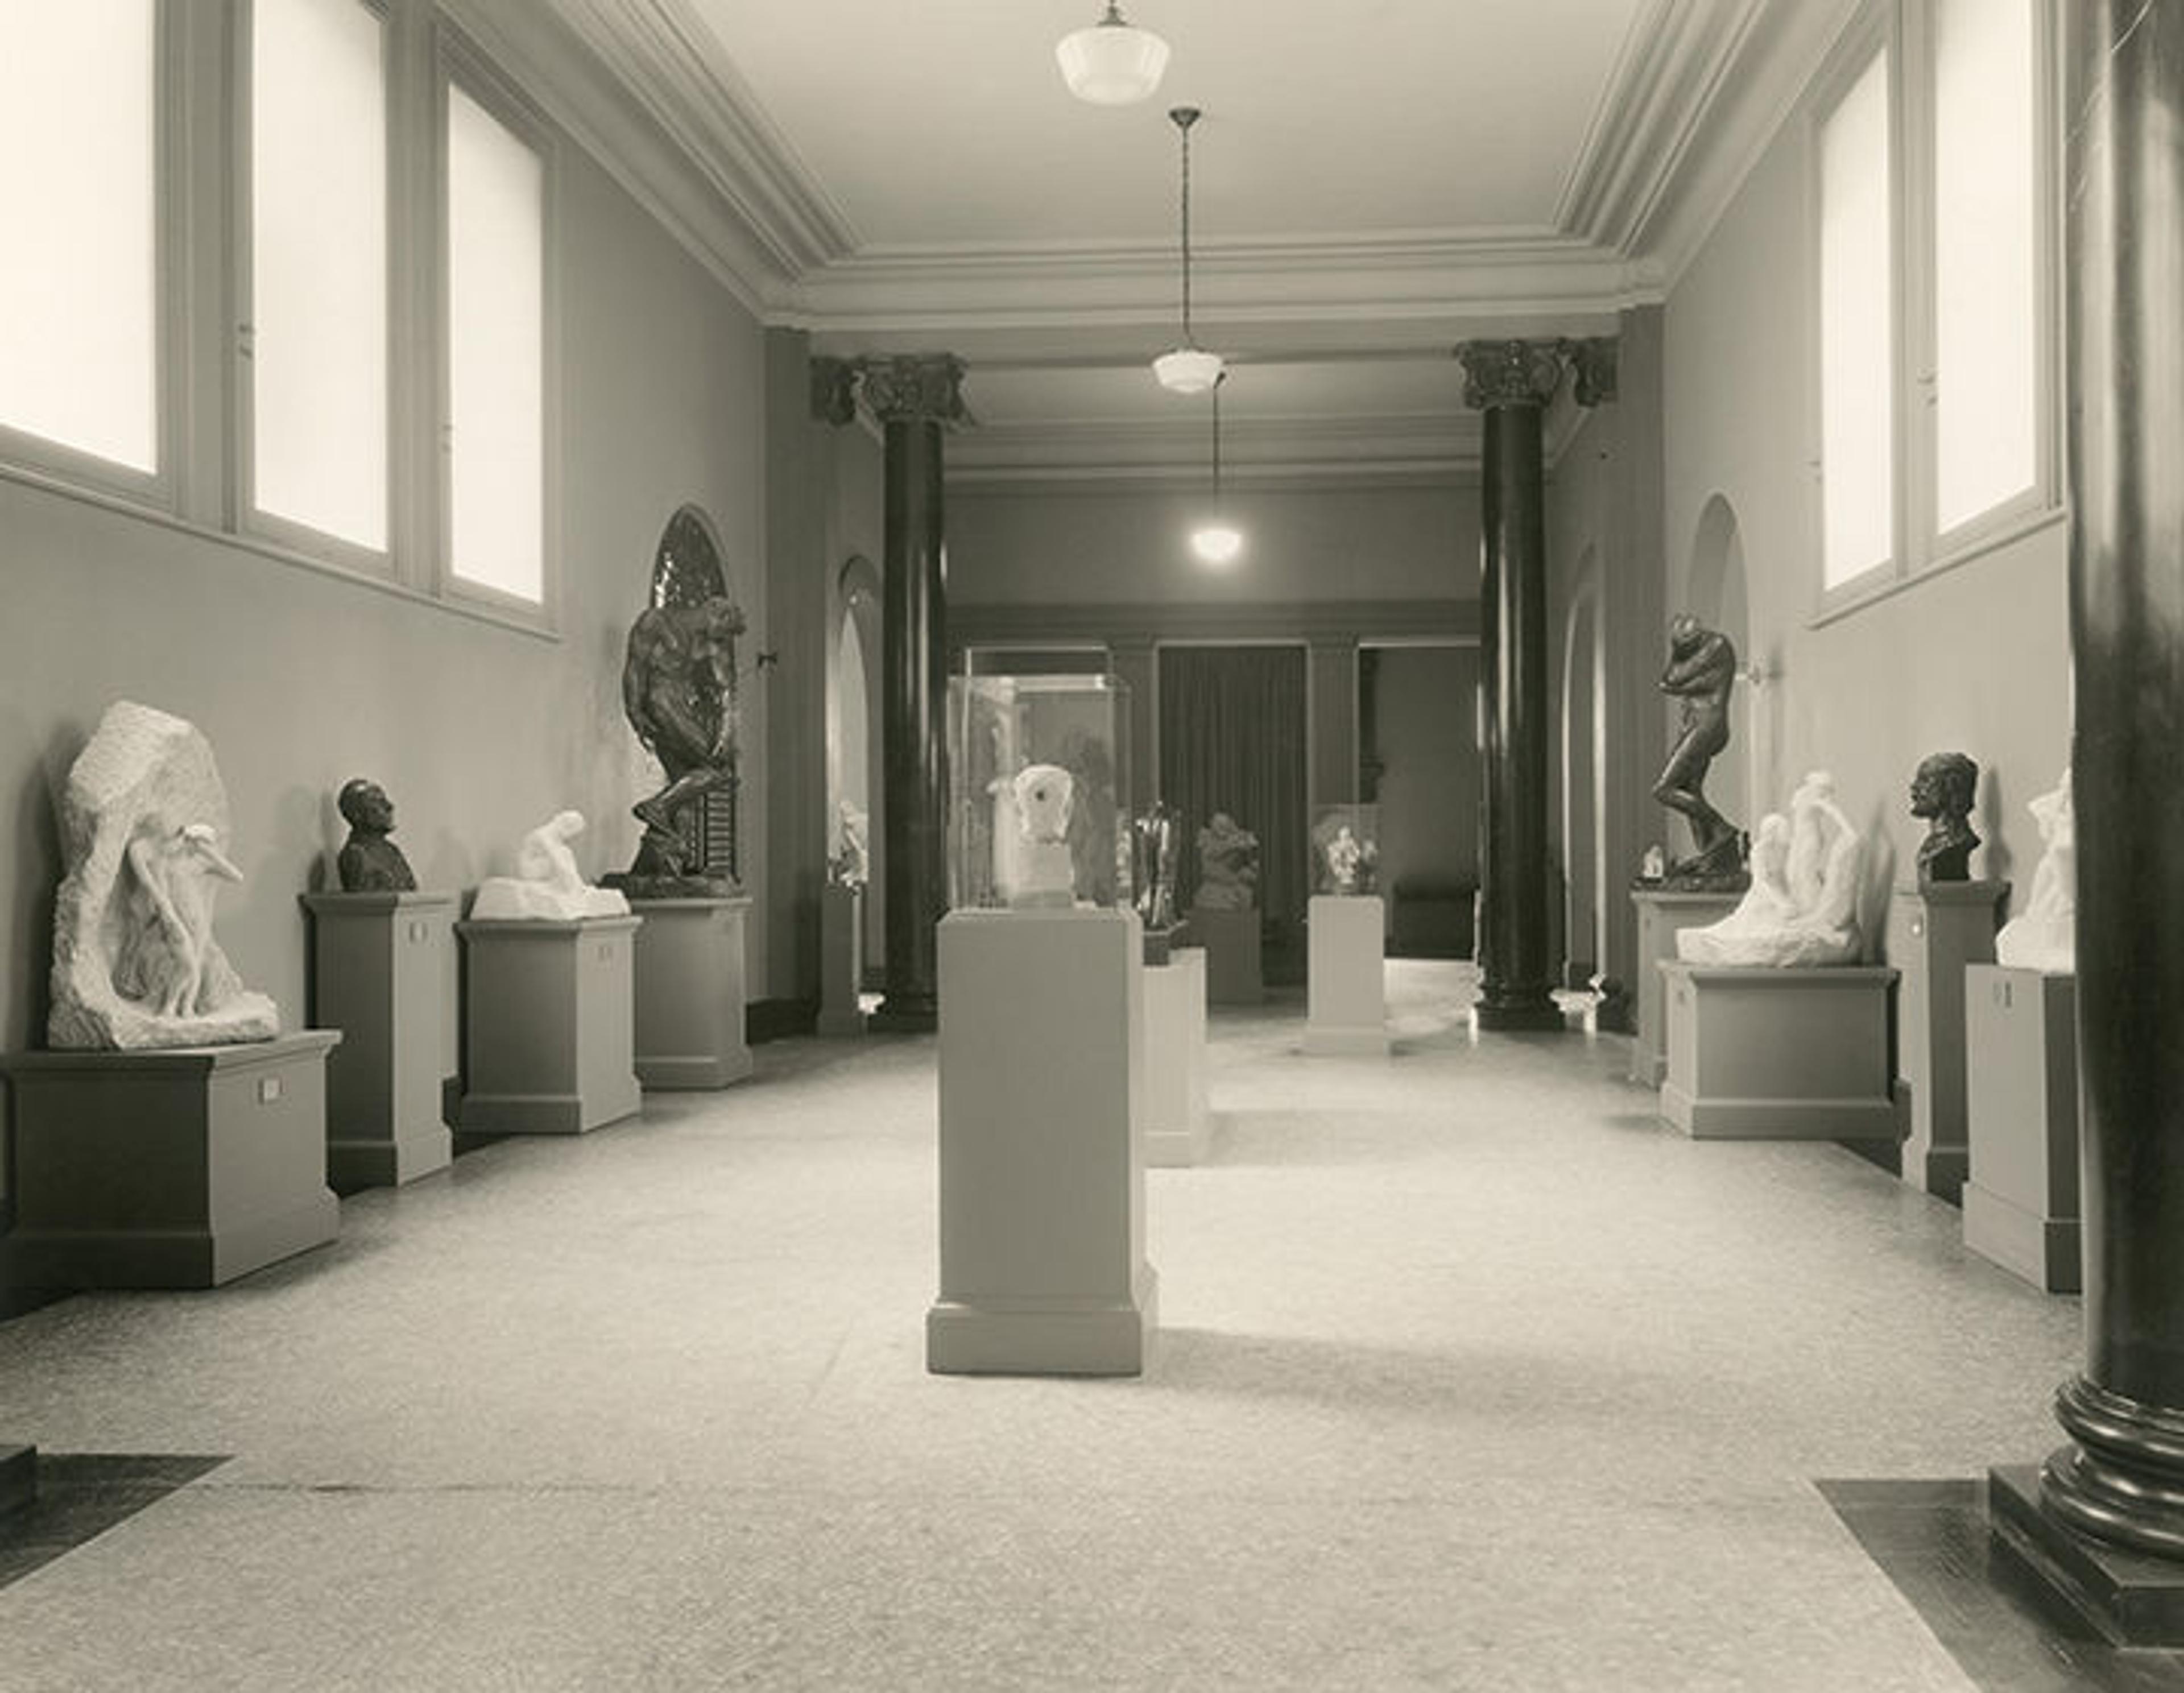 History of Auguste Rodin at The Metropolitan Museum of Art